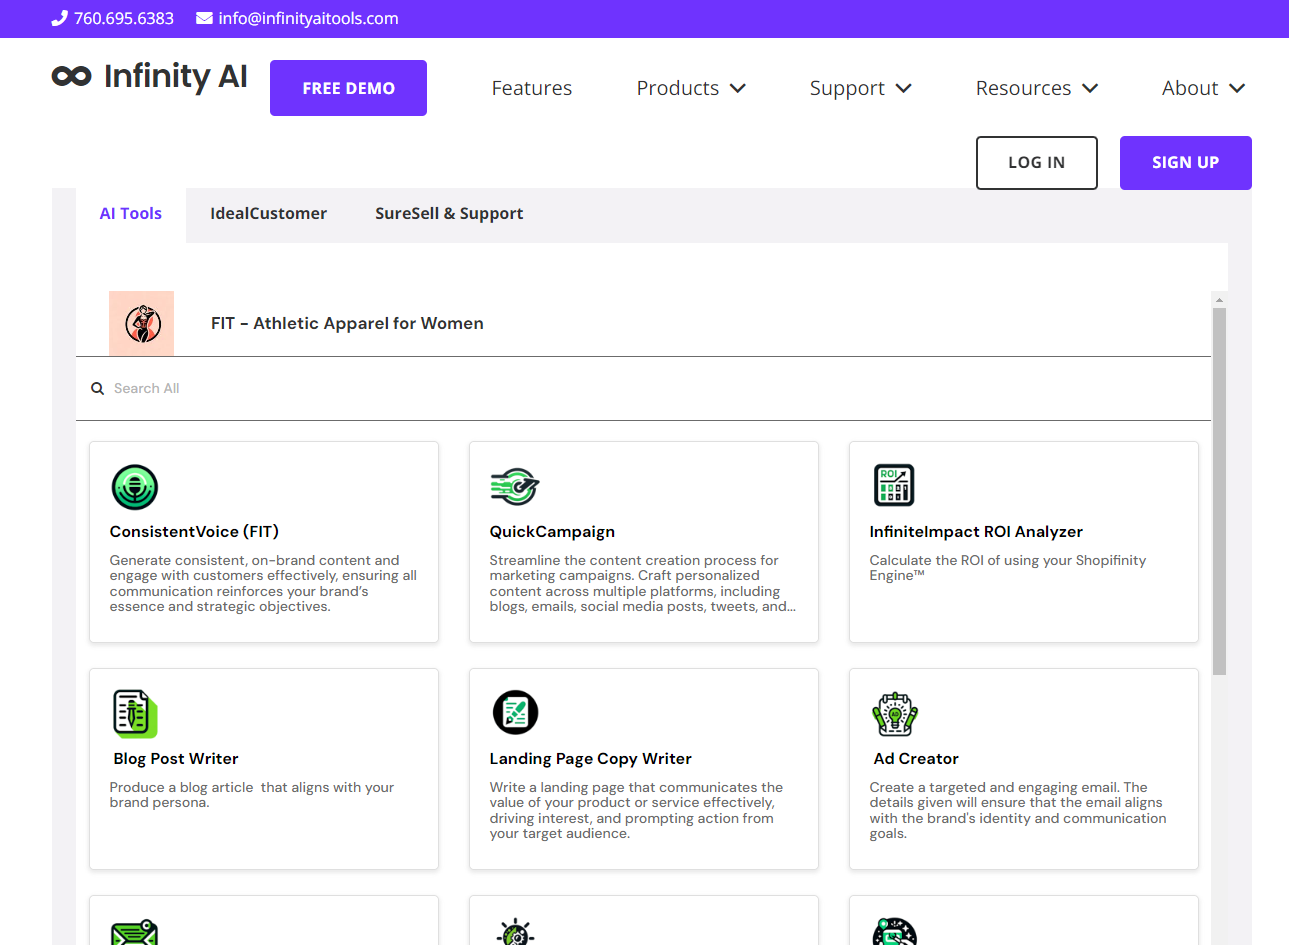 shopifinity-engine - Fully customized AI solutions designed for Shopify stores